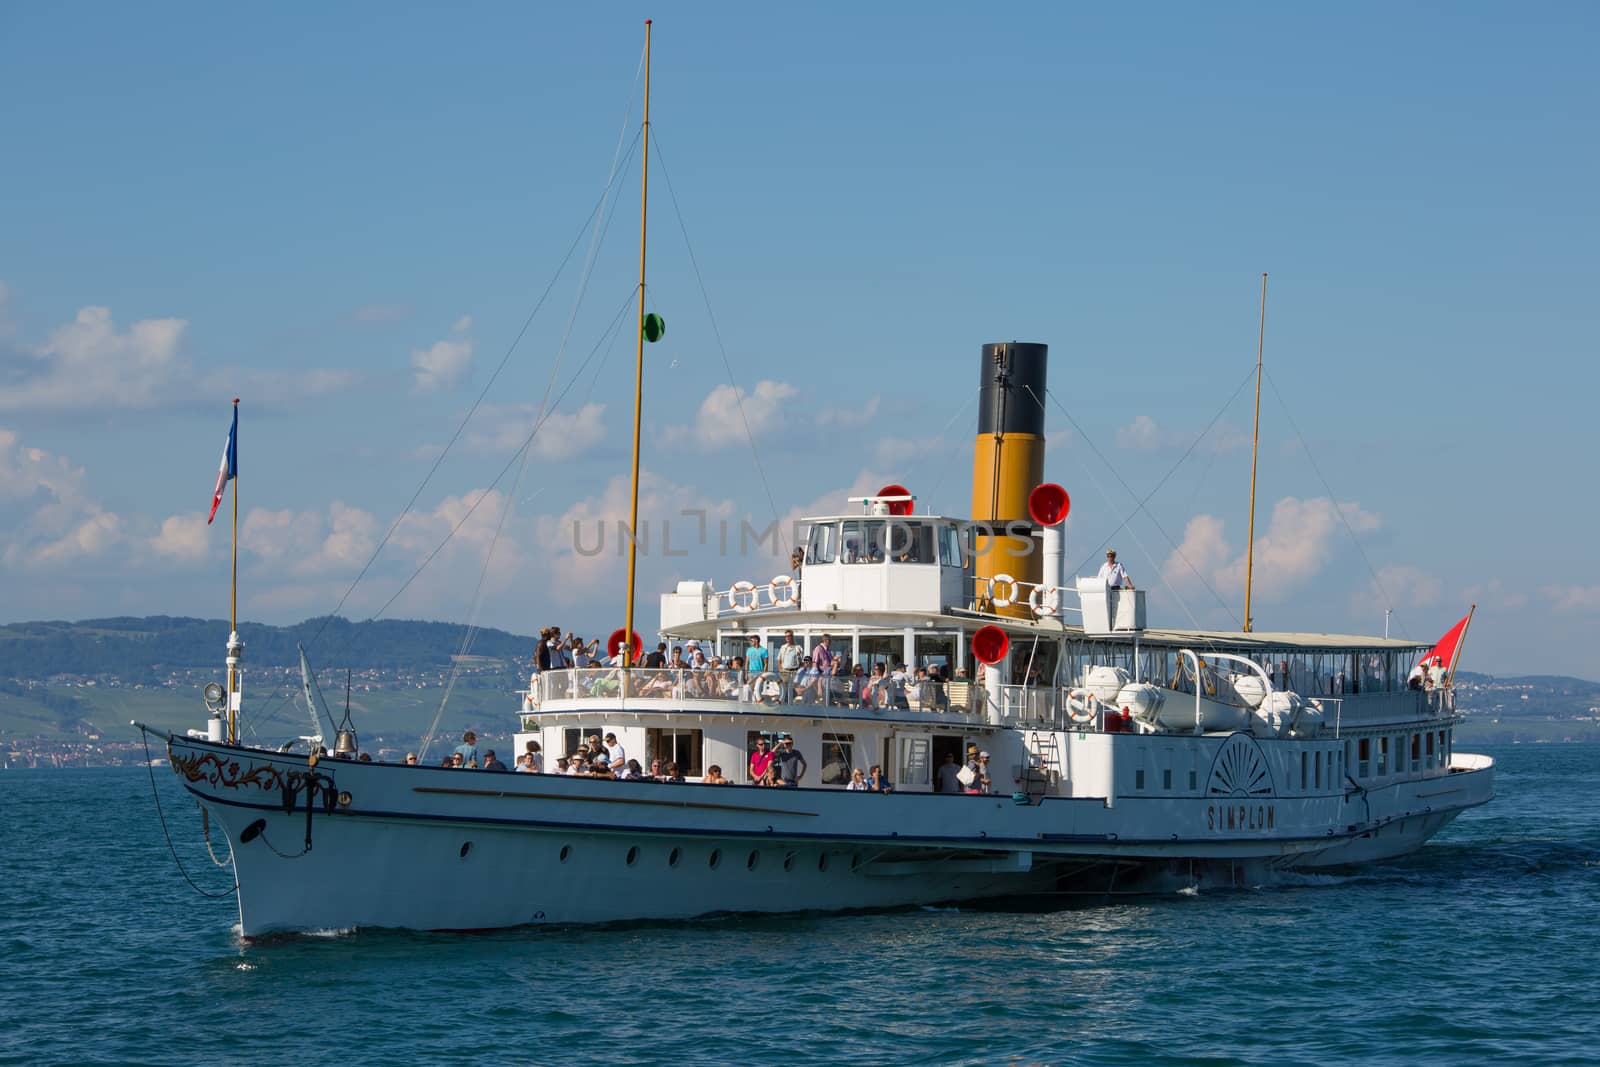 Yvoire, France - August 22, 2015: The Simplon passenger steamboat arriving in the medieval city of Yvoire, France.